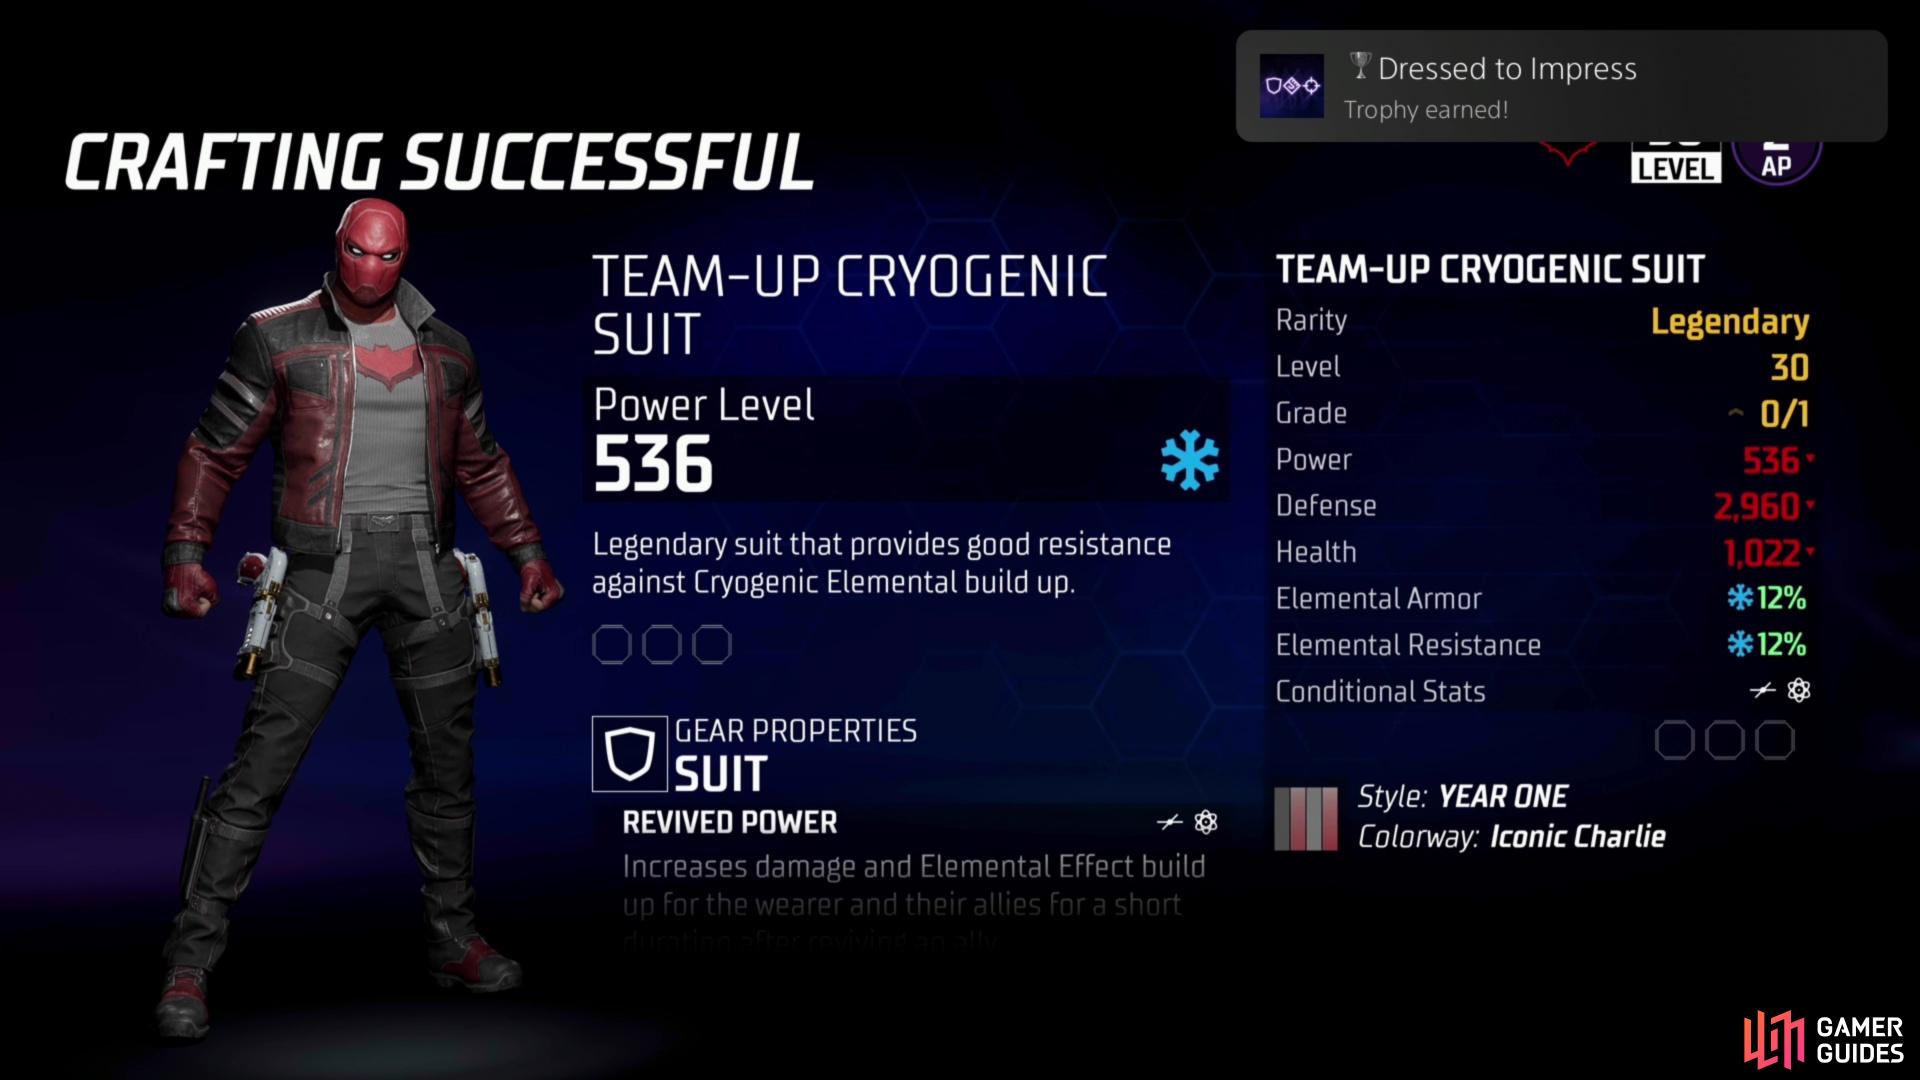 Crafted a legendary suit, melee weapon and ranged weapon to earn the “Dressed to Impress” achievement.